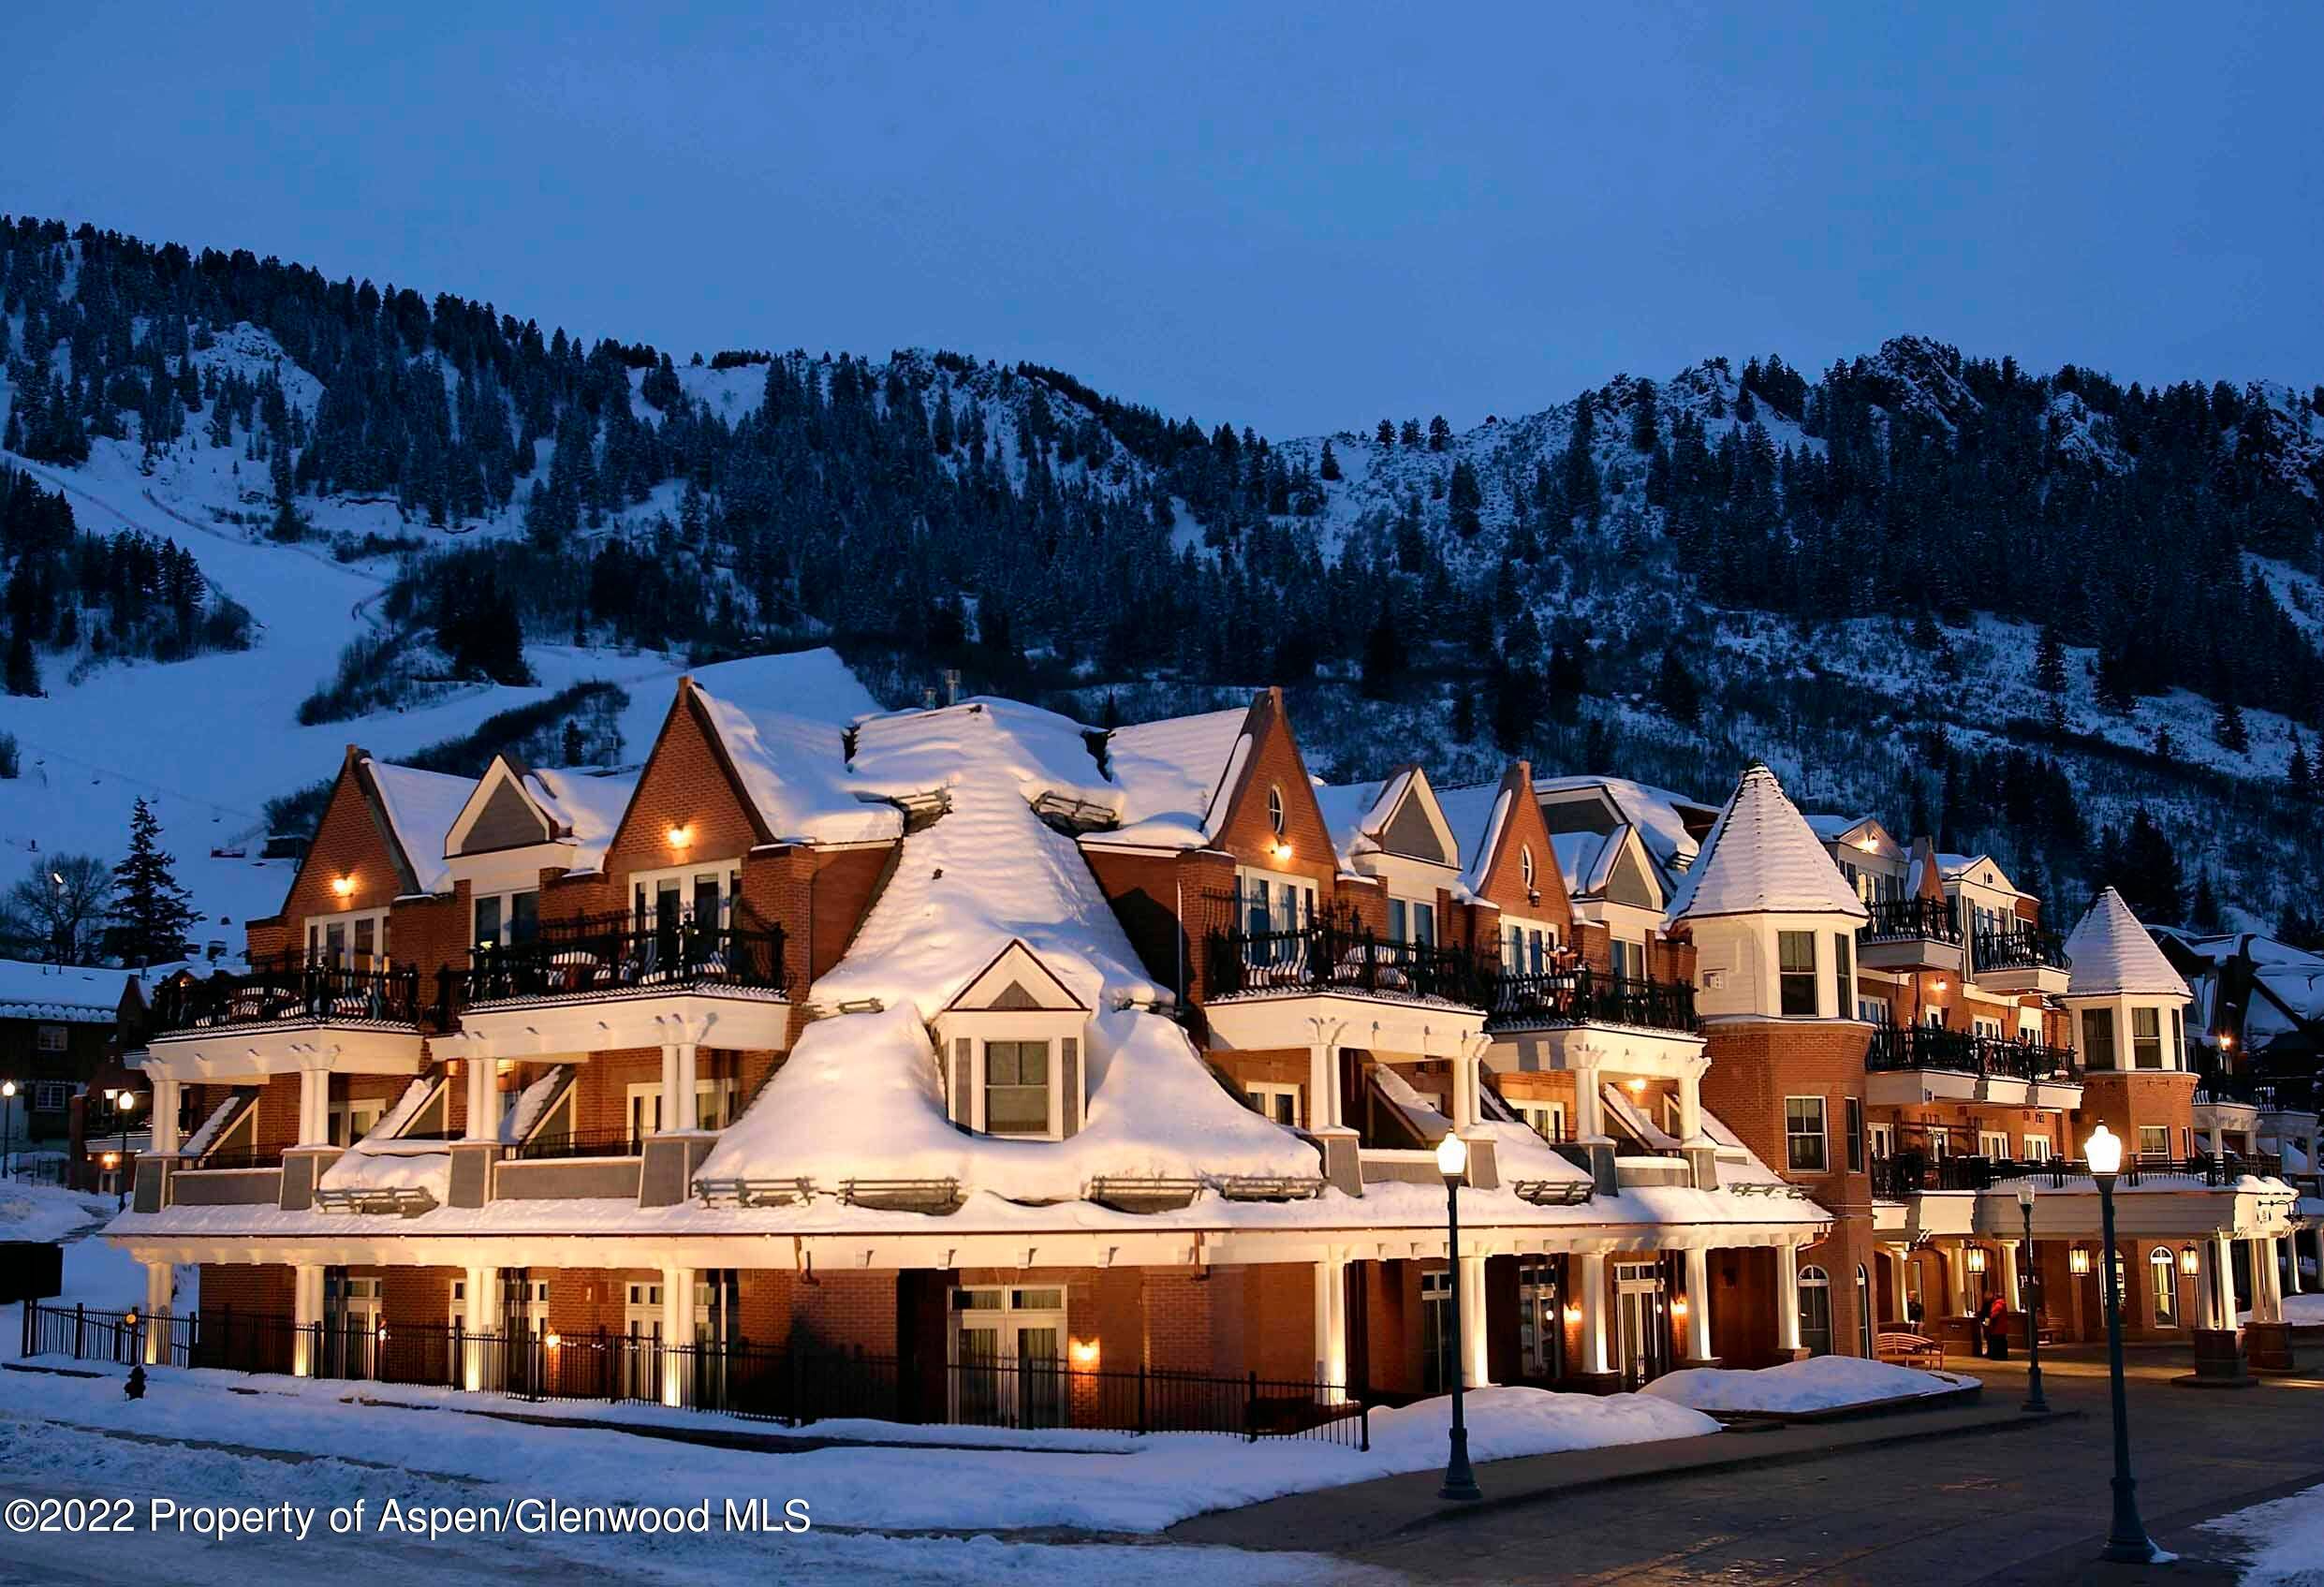 The Aspen Mountain Residences enjoy the perfect location, right in the heart of Aspen, one block to the Silver Queen Gondola.